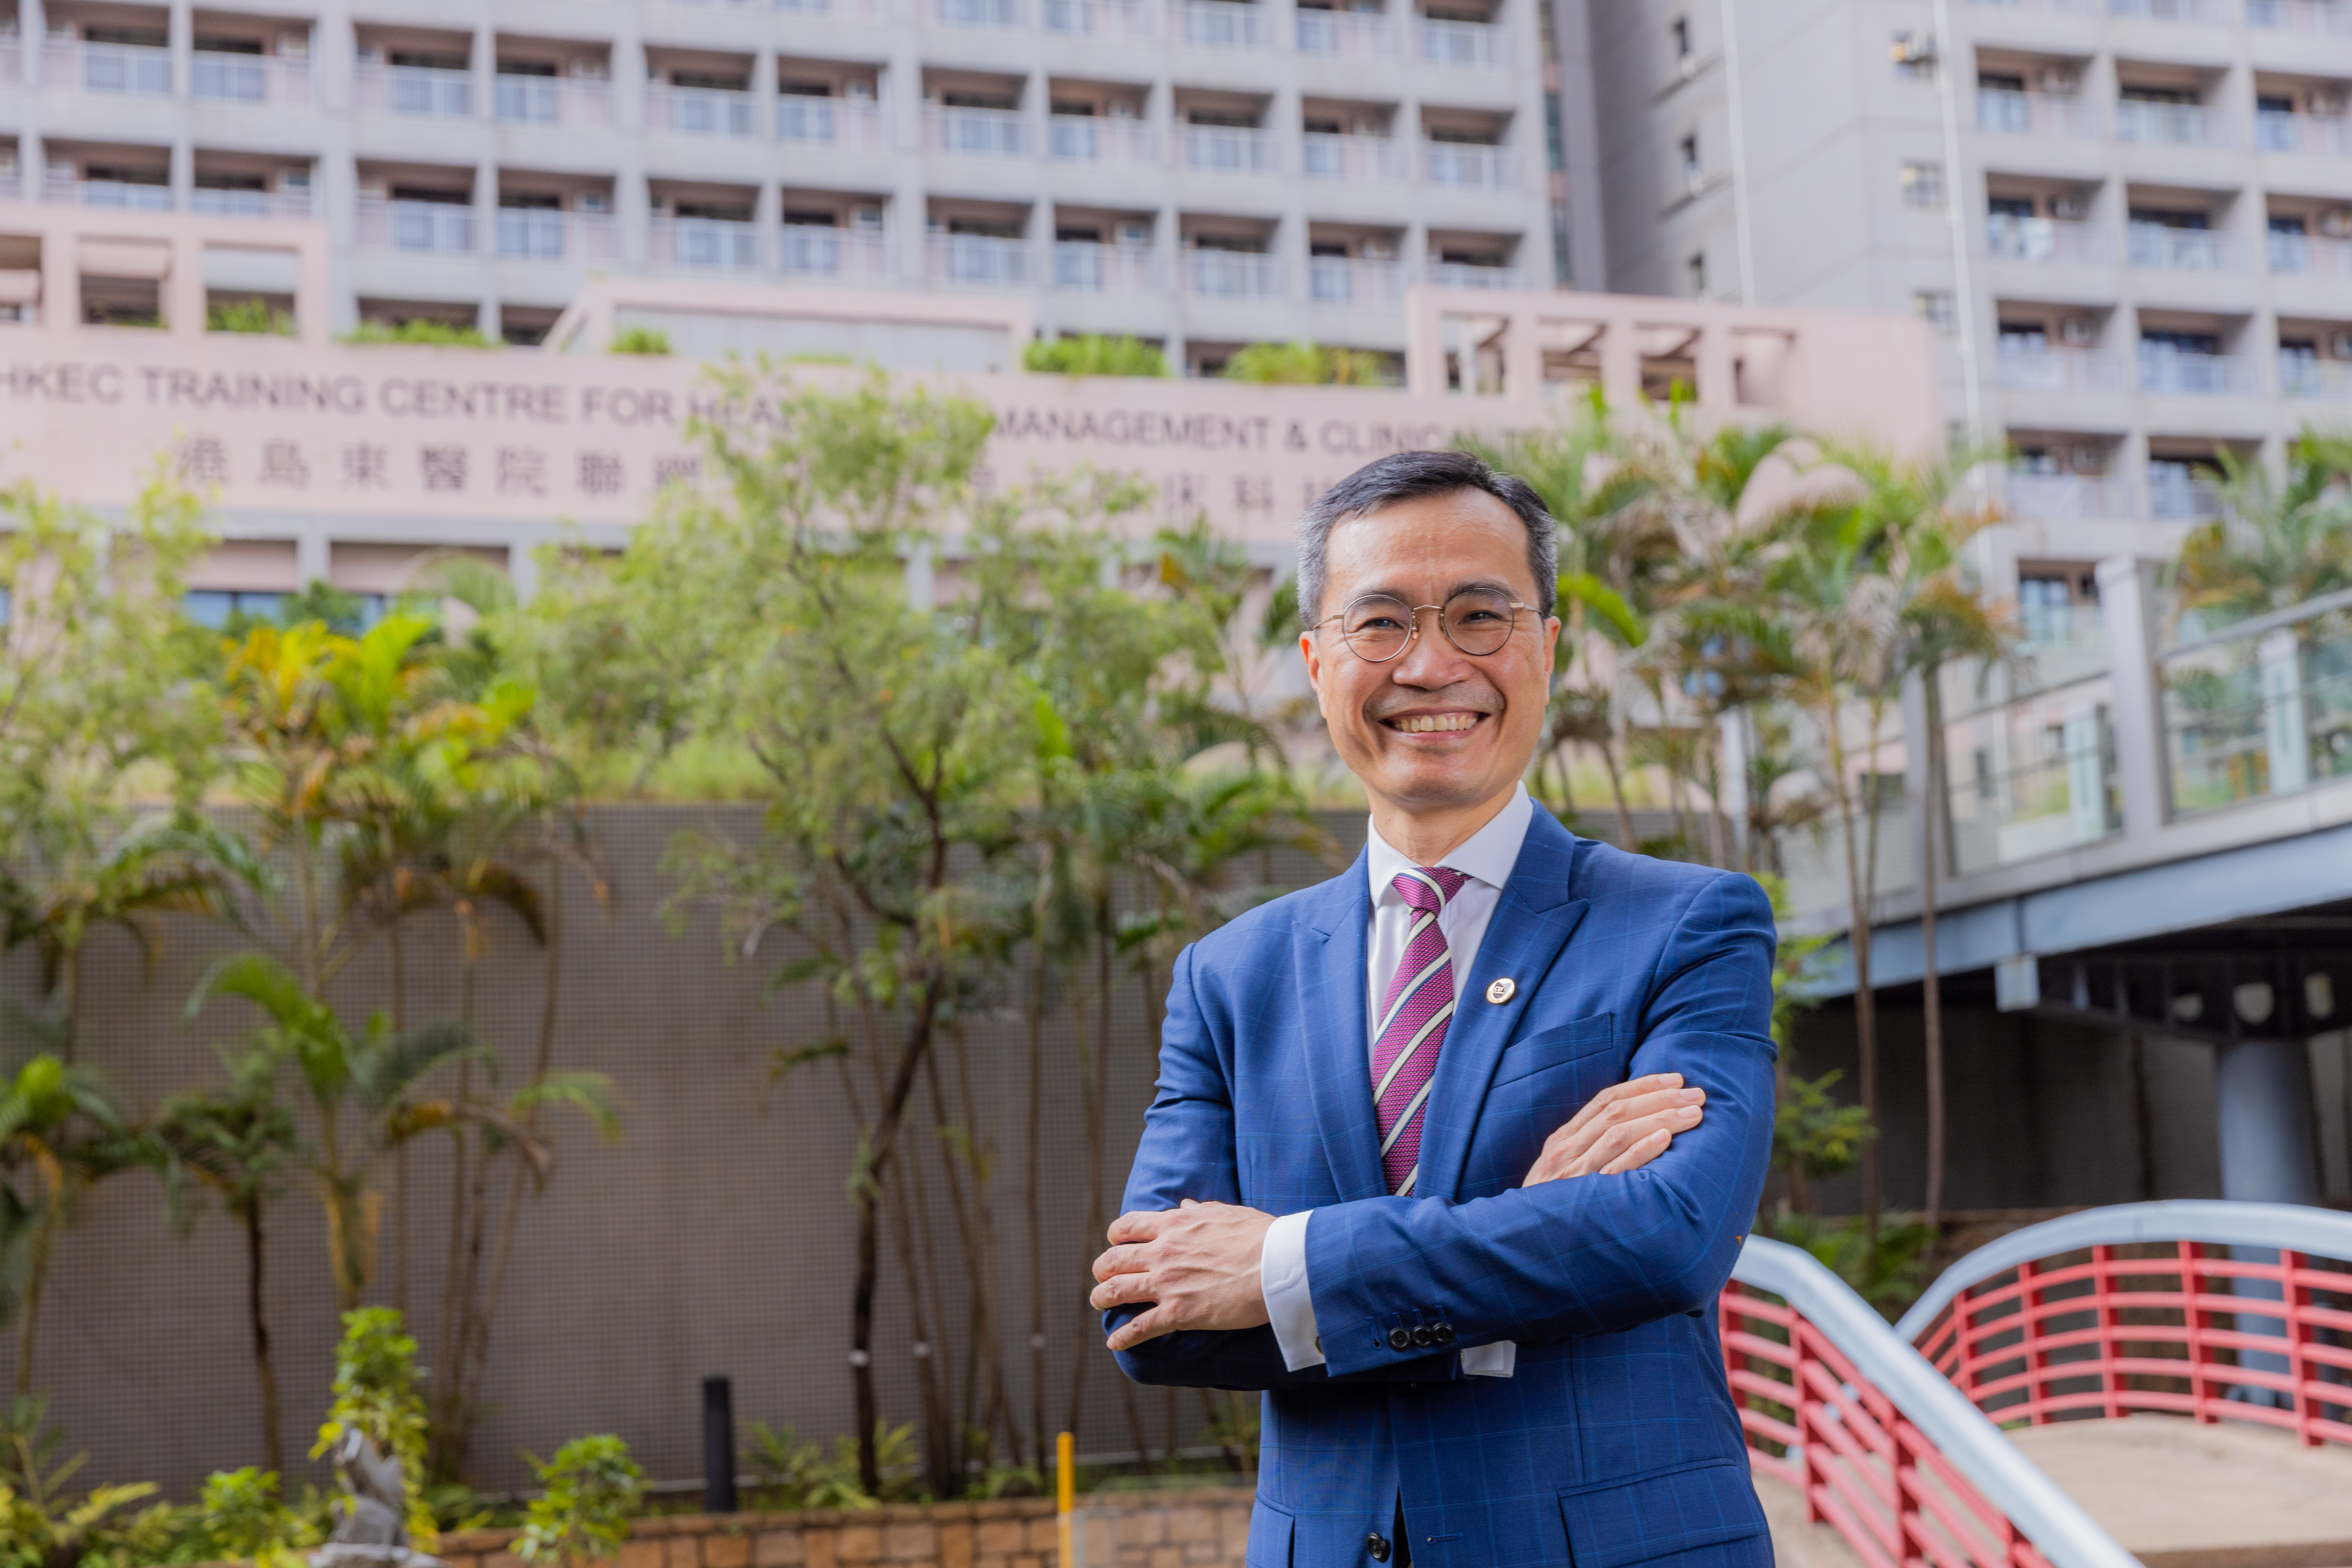 Dr. LUK Che Chung (MBChB 1986) is the awardee in Global Achievement 2020 of the CUHK Distinguished Medical Alumni Award